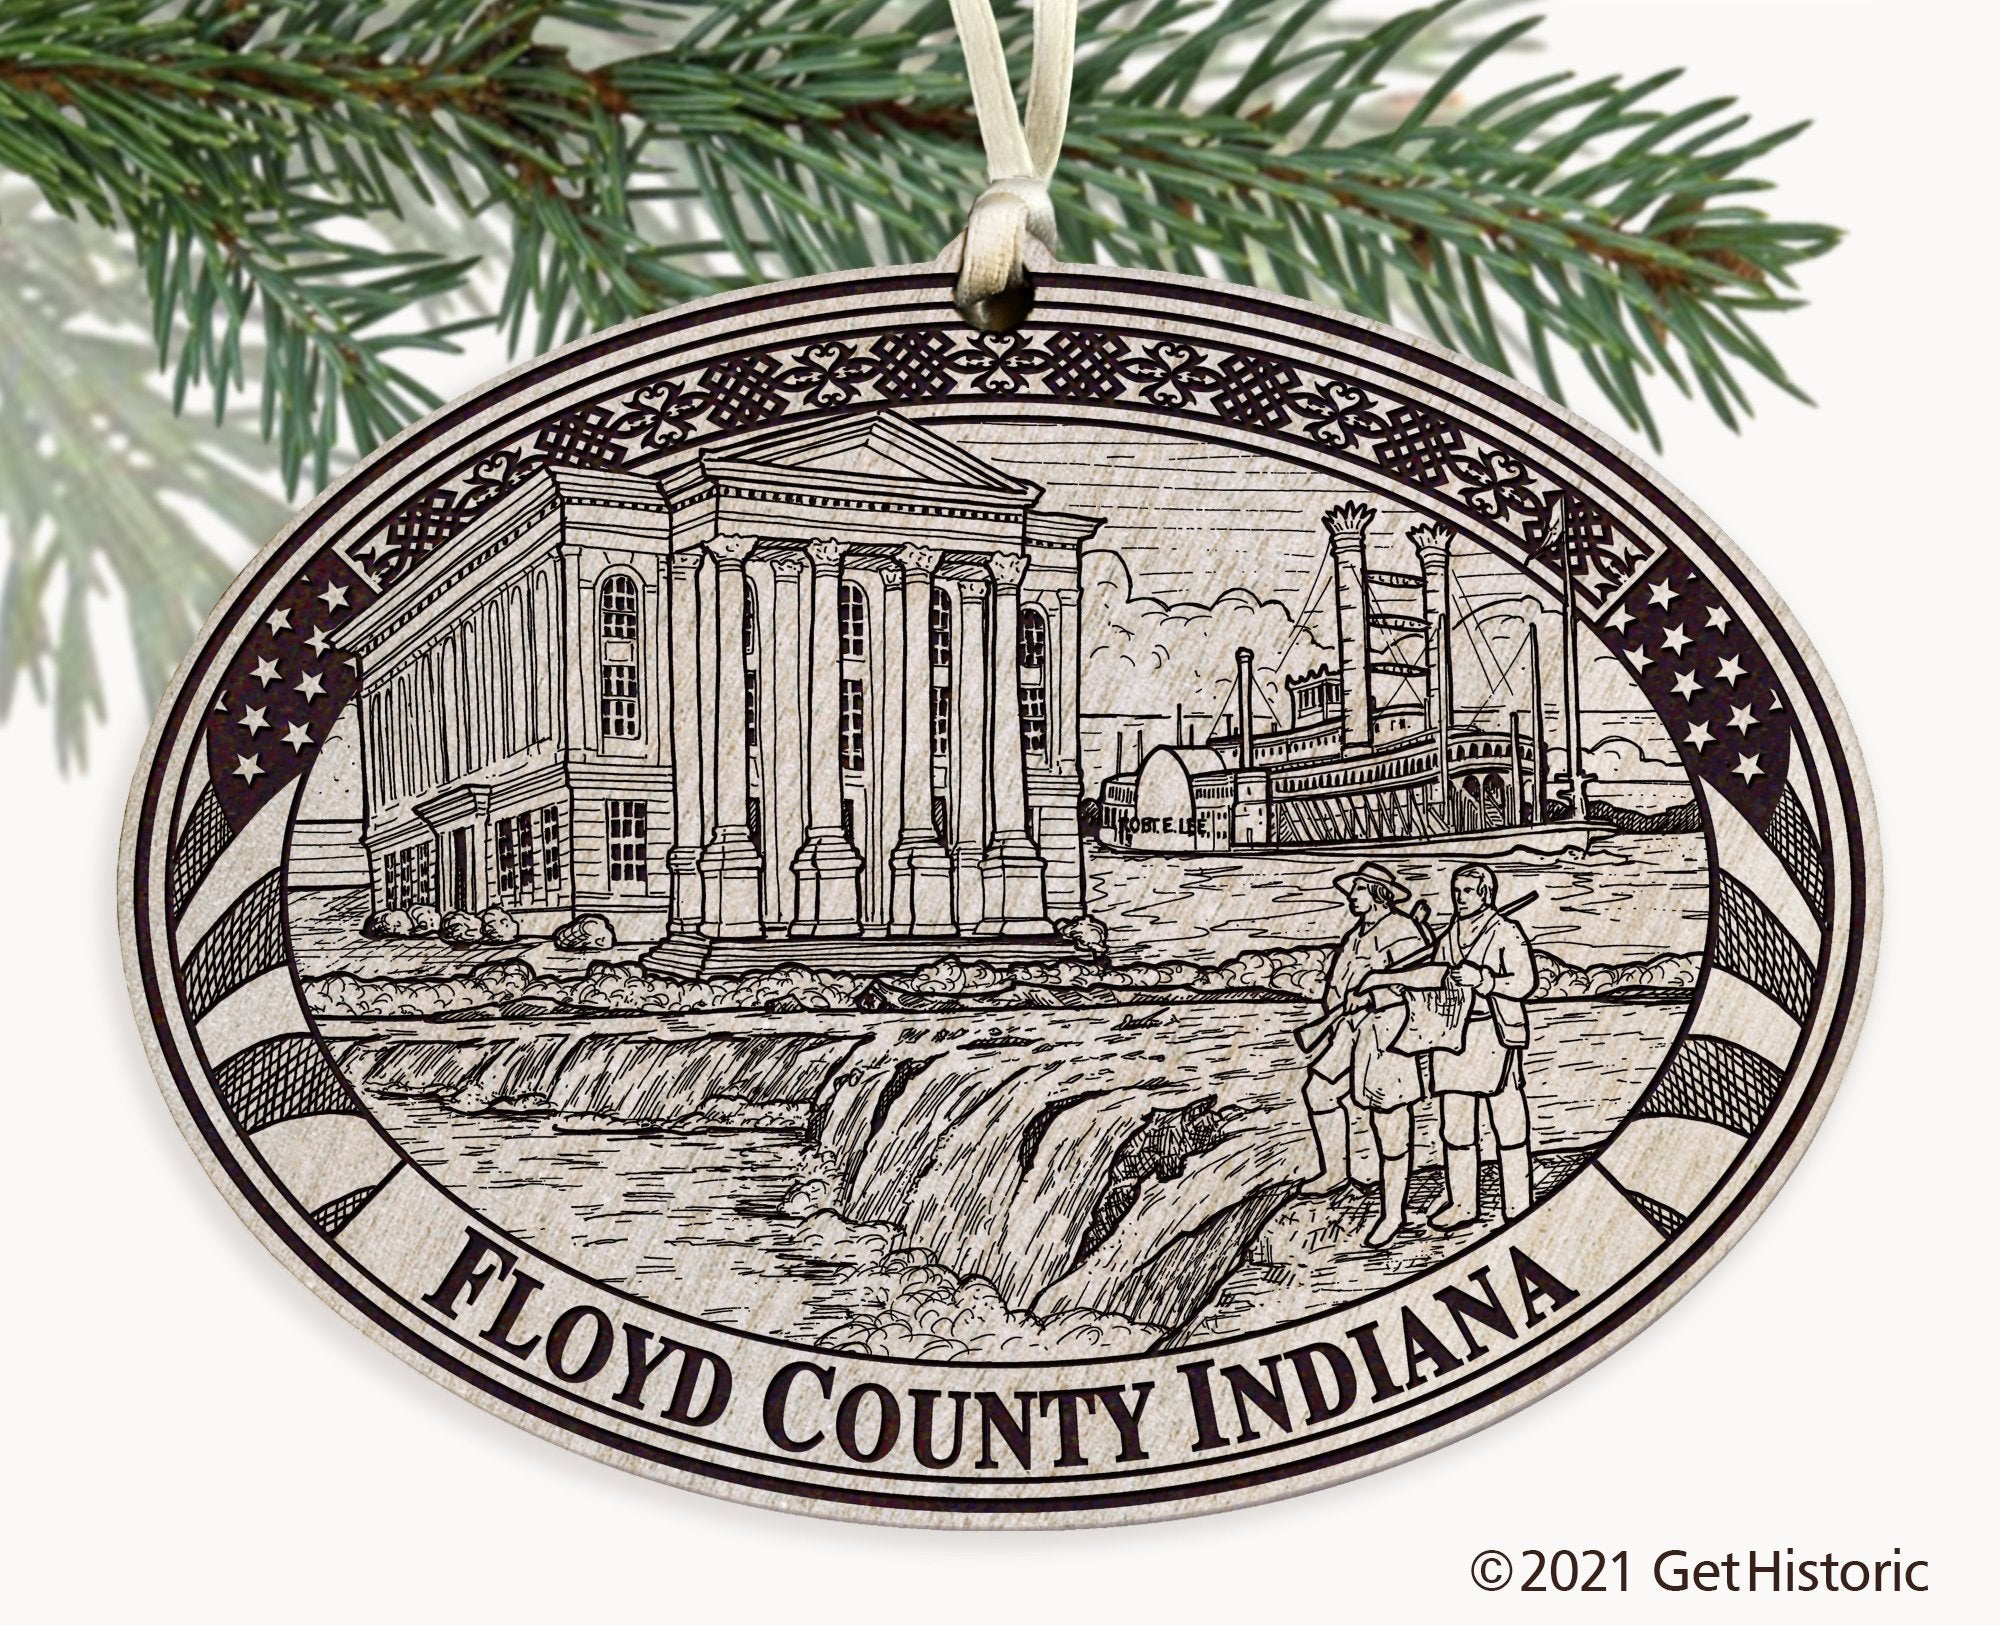 Floyd County Indiana Engraved Ornament